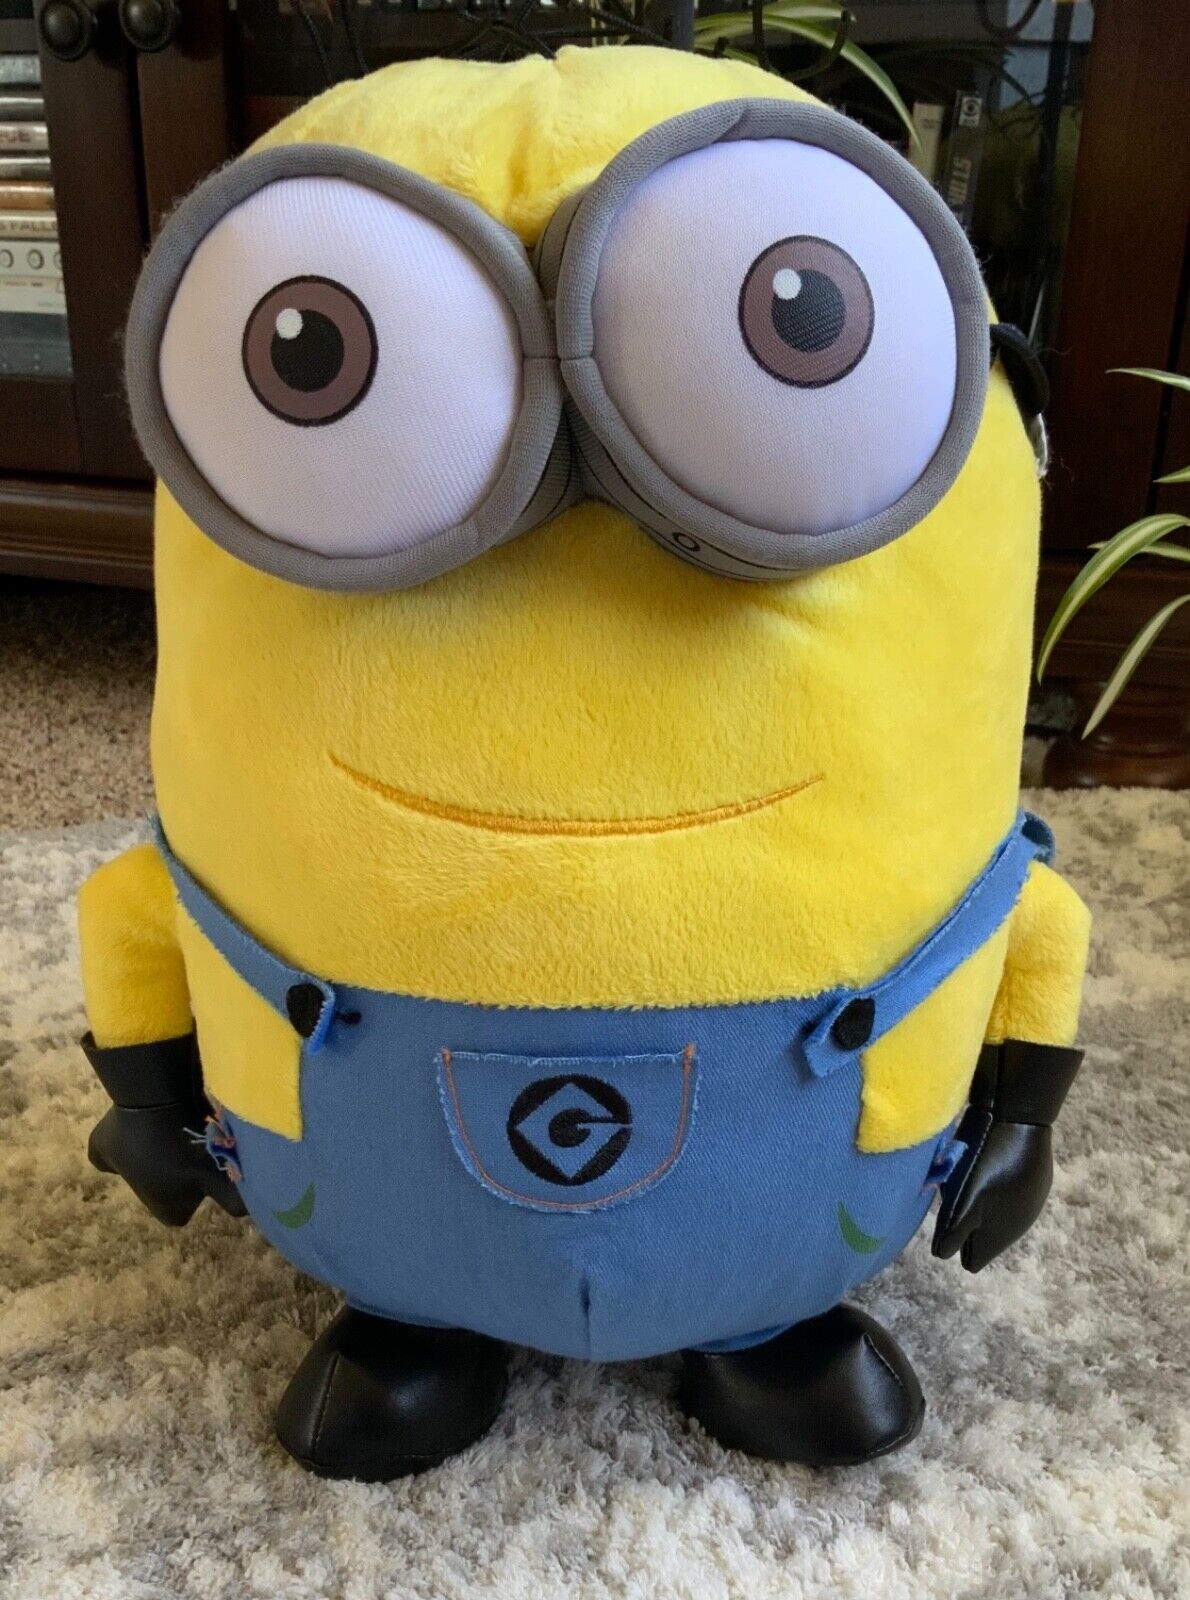  Despicable Me Minion with Handle. Trademark and Copyright of Universal Studio